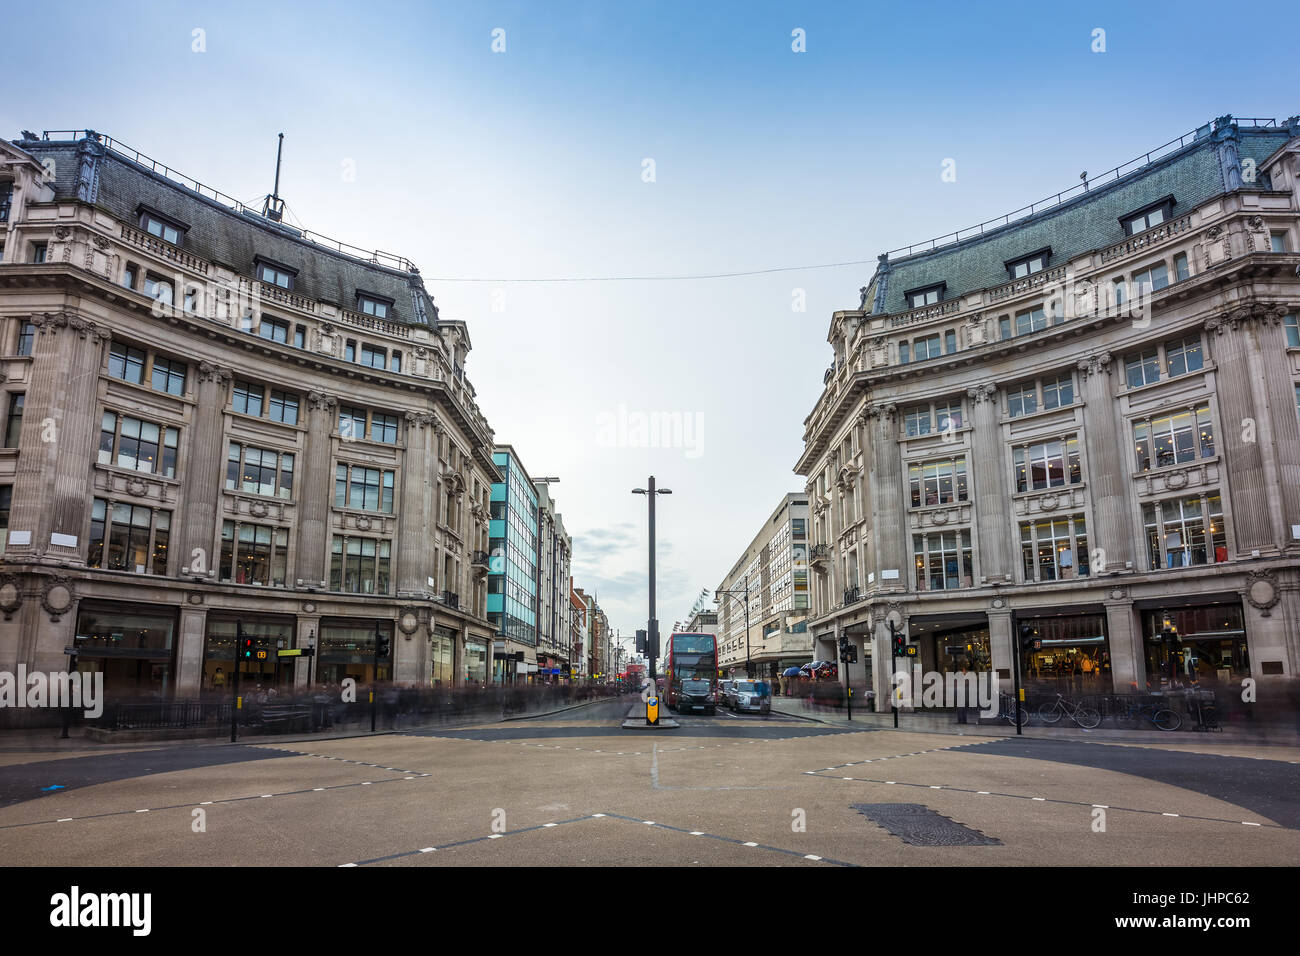 London, England - The famous Oxford Circus with Oxford Street and Regent Street on a busy day Stock Photo